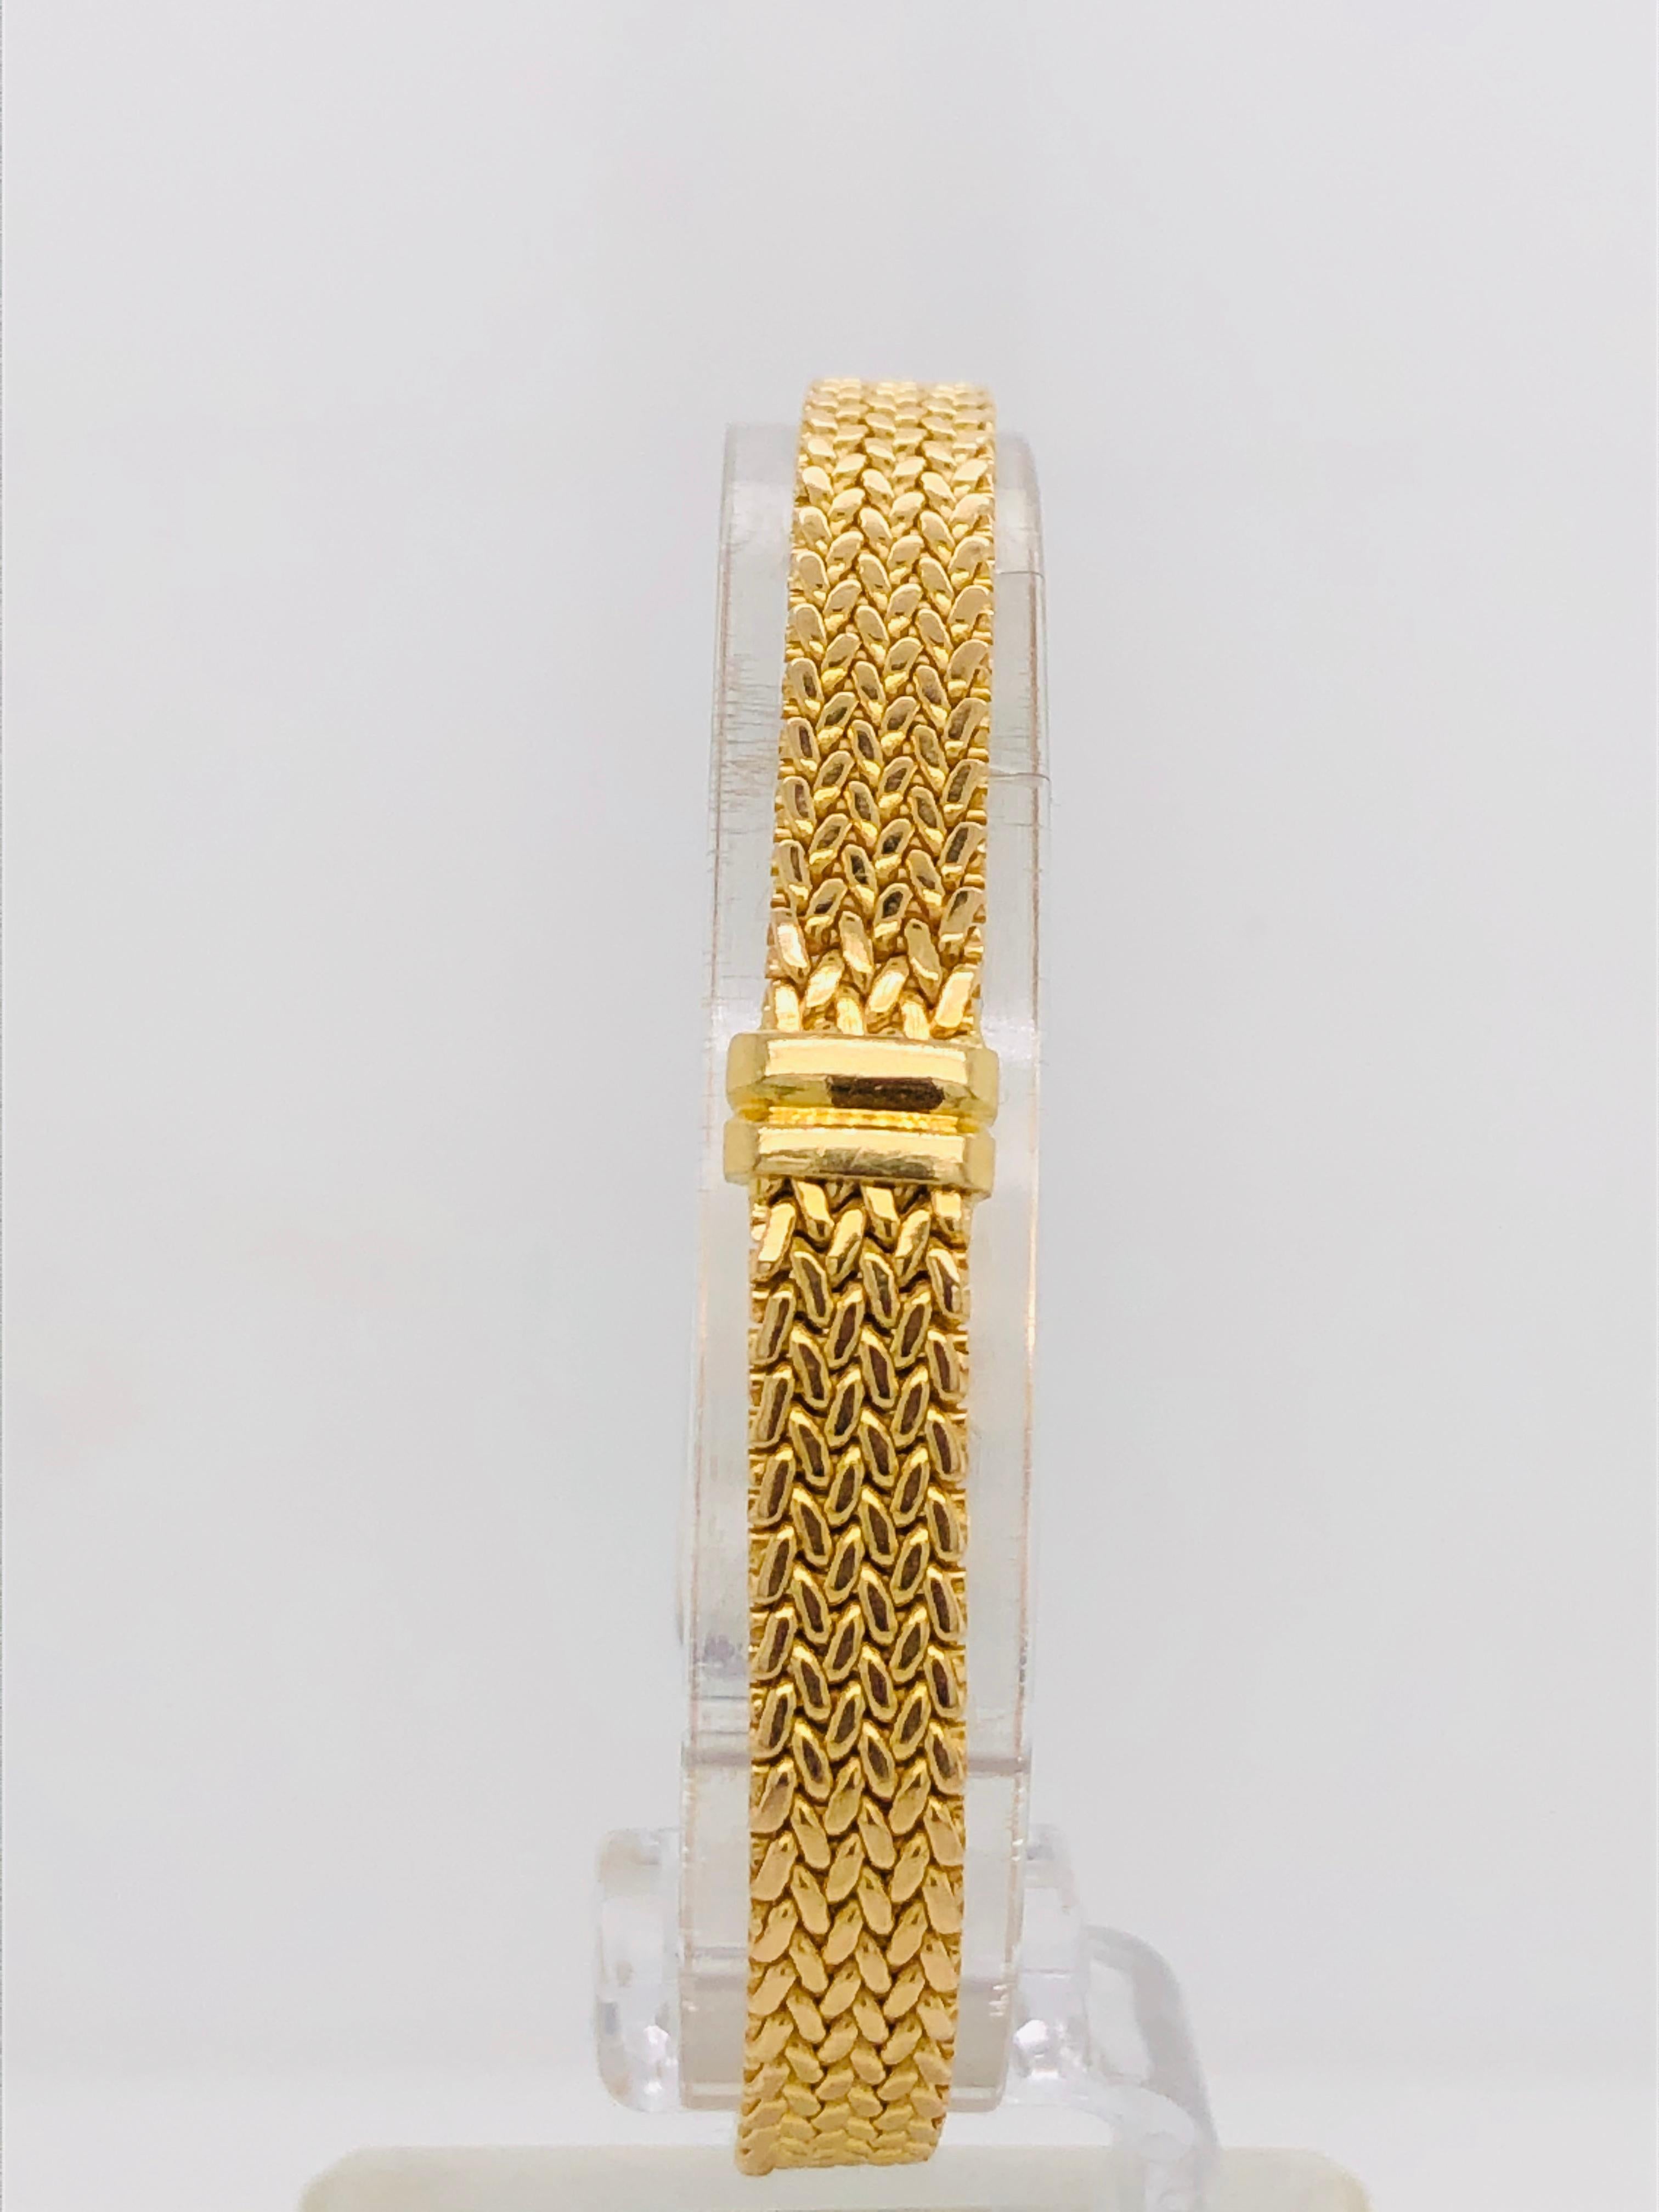 All Gold Bracelet 18k mesh braided
Length : 17 cm 
Security Clasp 
Weight Of Gold : 14.76 Grams 